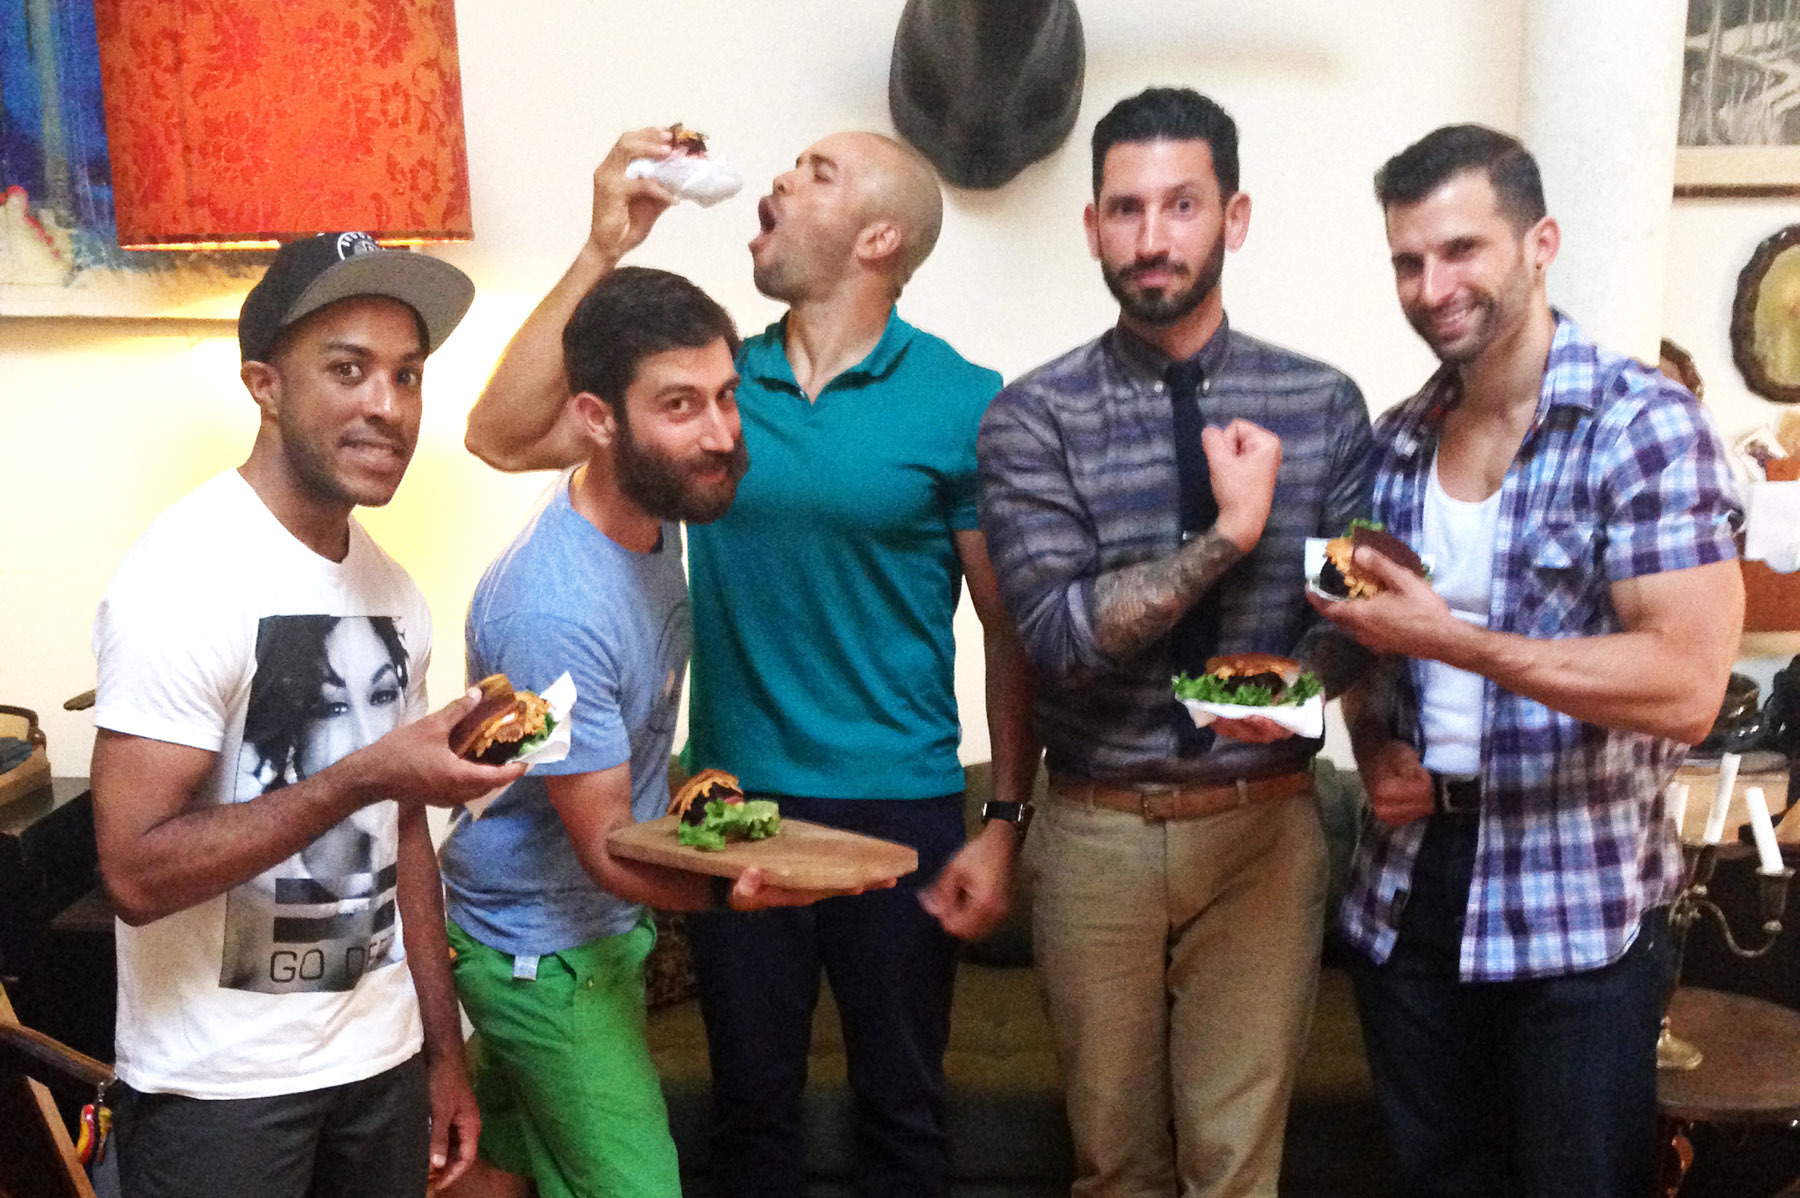 Mixed martial arts fighter Cornell Ward (from left), chef Daniel Strong, triathlete Dominic Thompson, lifestyle blogger Joshua Katcher and competitive bodybuilder Giacomo Marchese at a vegan barbecue in Brooklyn, N.Y. Photo: Courtesy of James Koroni